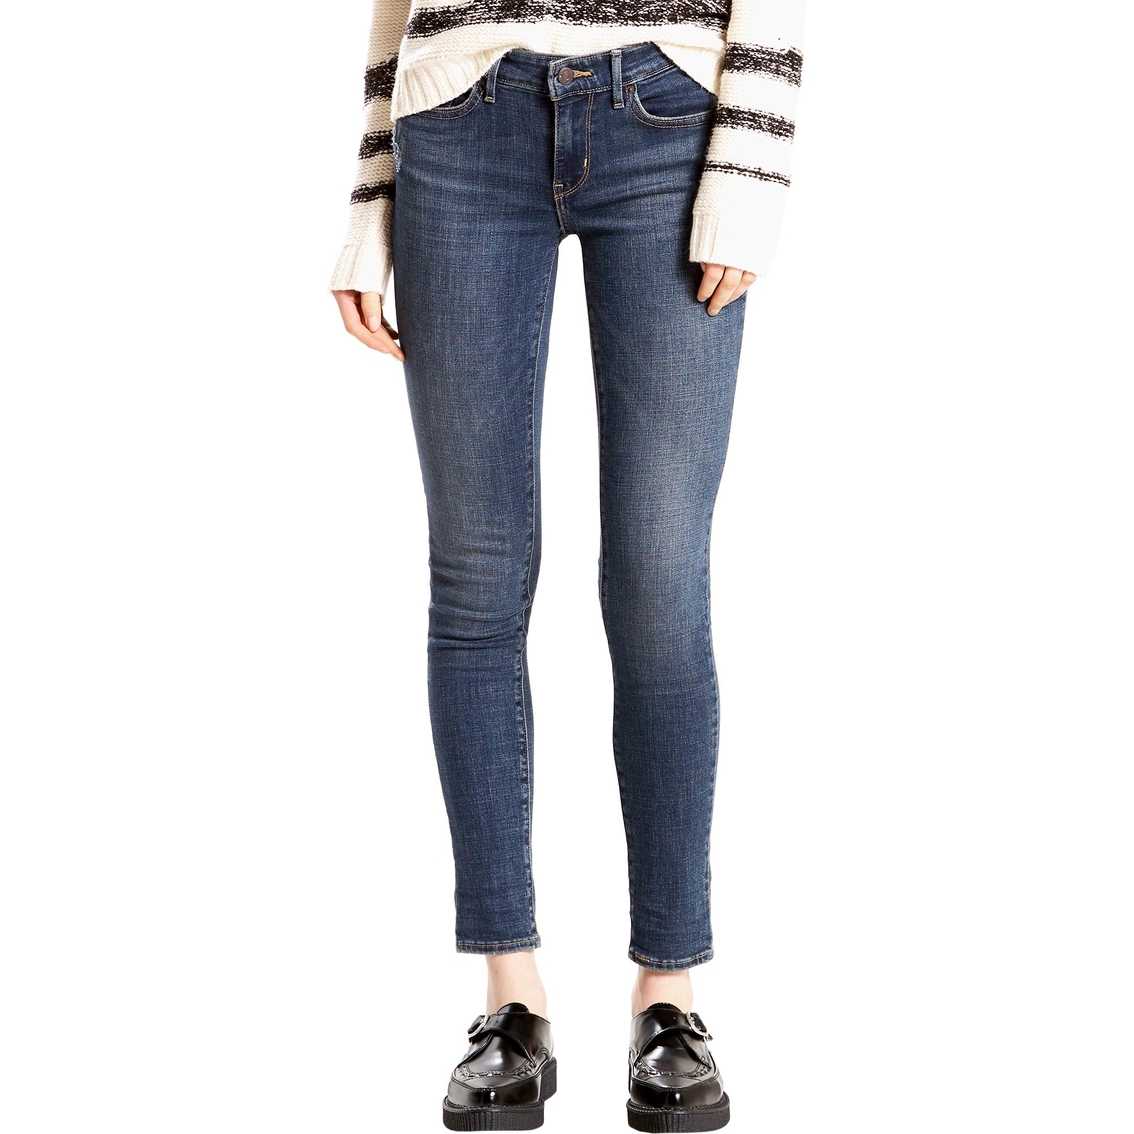 Levi's 711 Skinny Jeans | Saturday - Wk 77 | Shop The Exchange